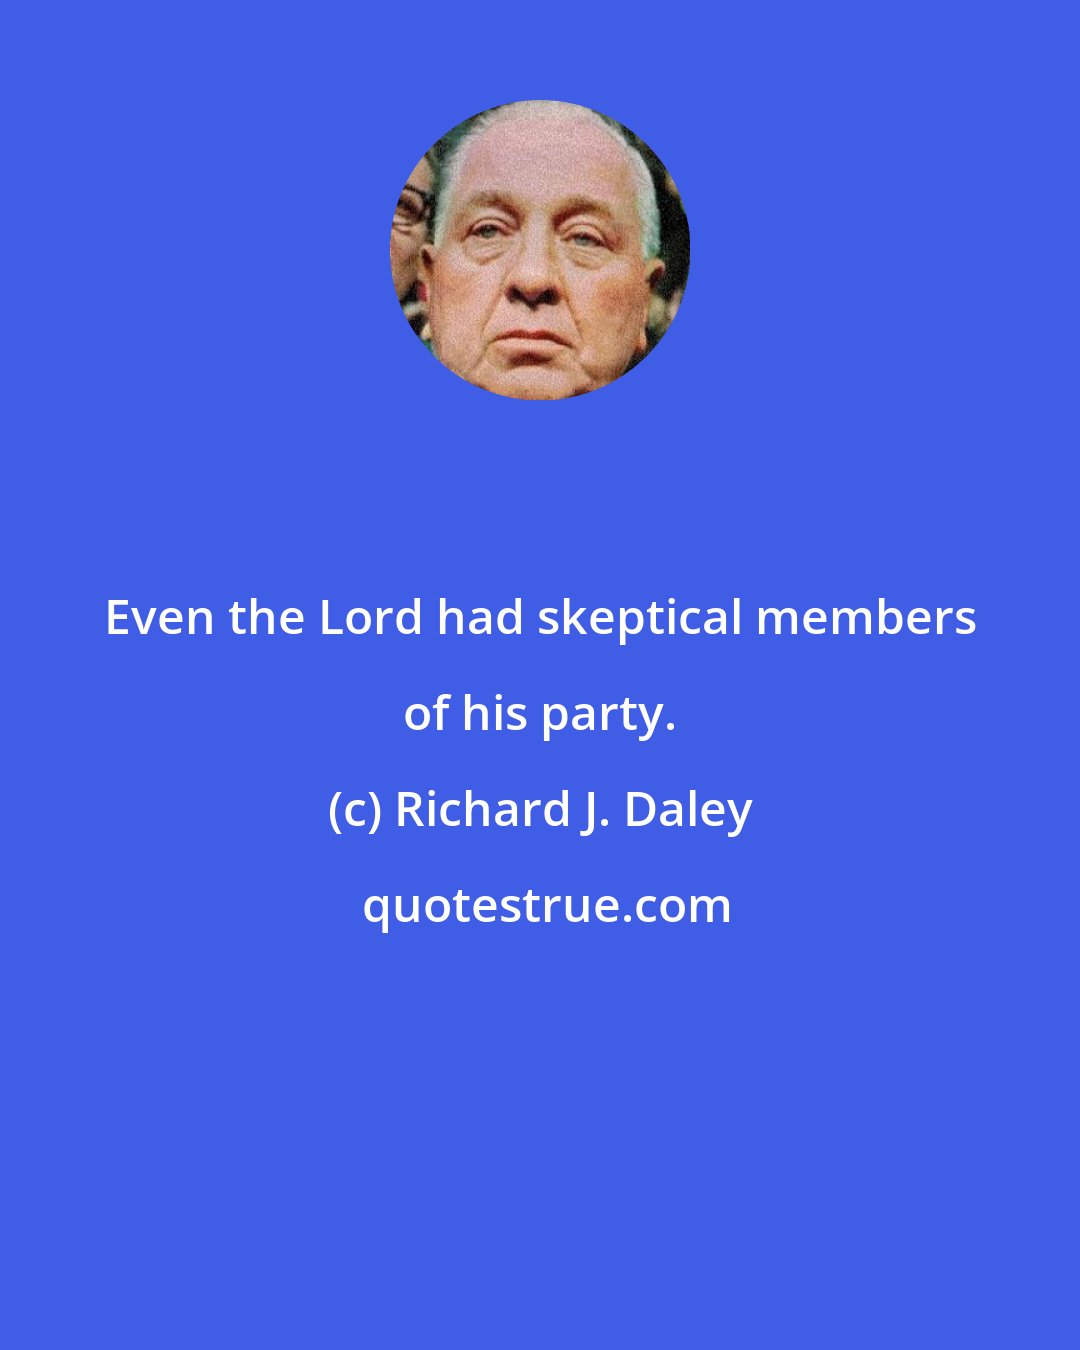 Richard J. Daley: Even the Lord had skeptical members of his party.